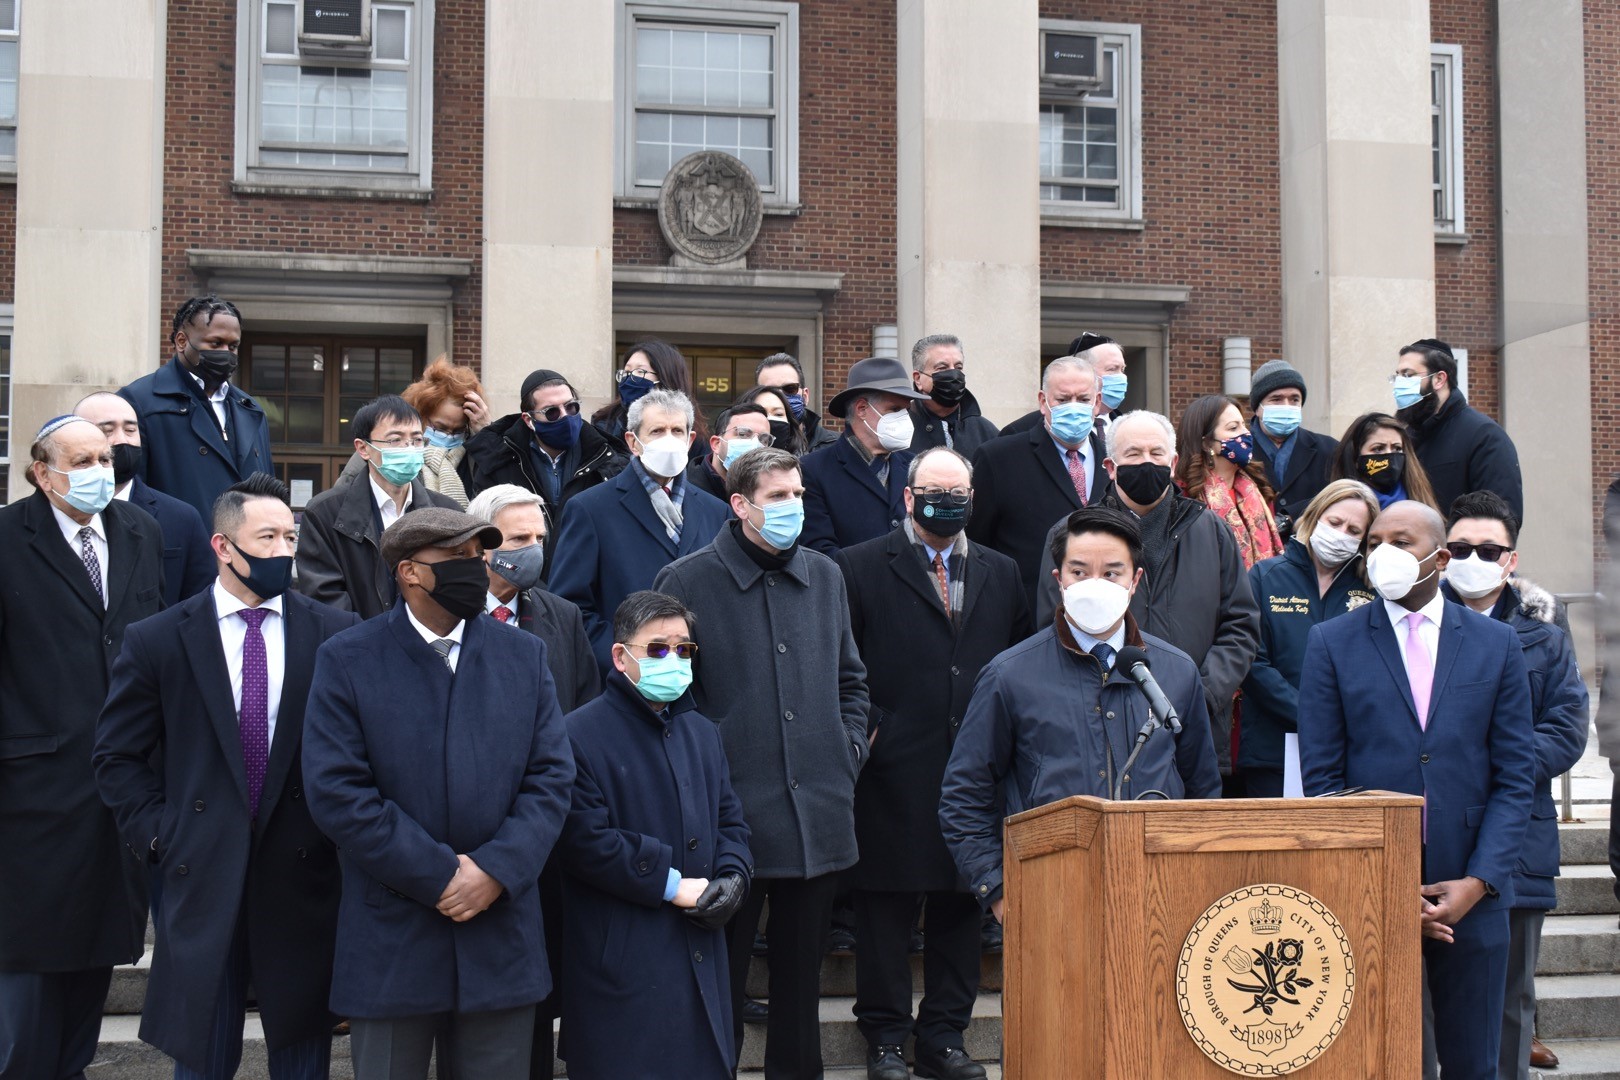 Assemblyman David Weprin stood alongside fellow elected officials in government and community leaders at a press conference denouncing the rise of hate crimes in Queens and across New York City. The p